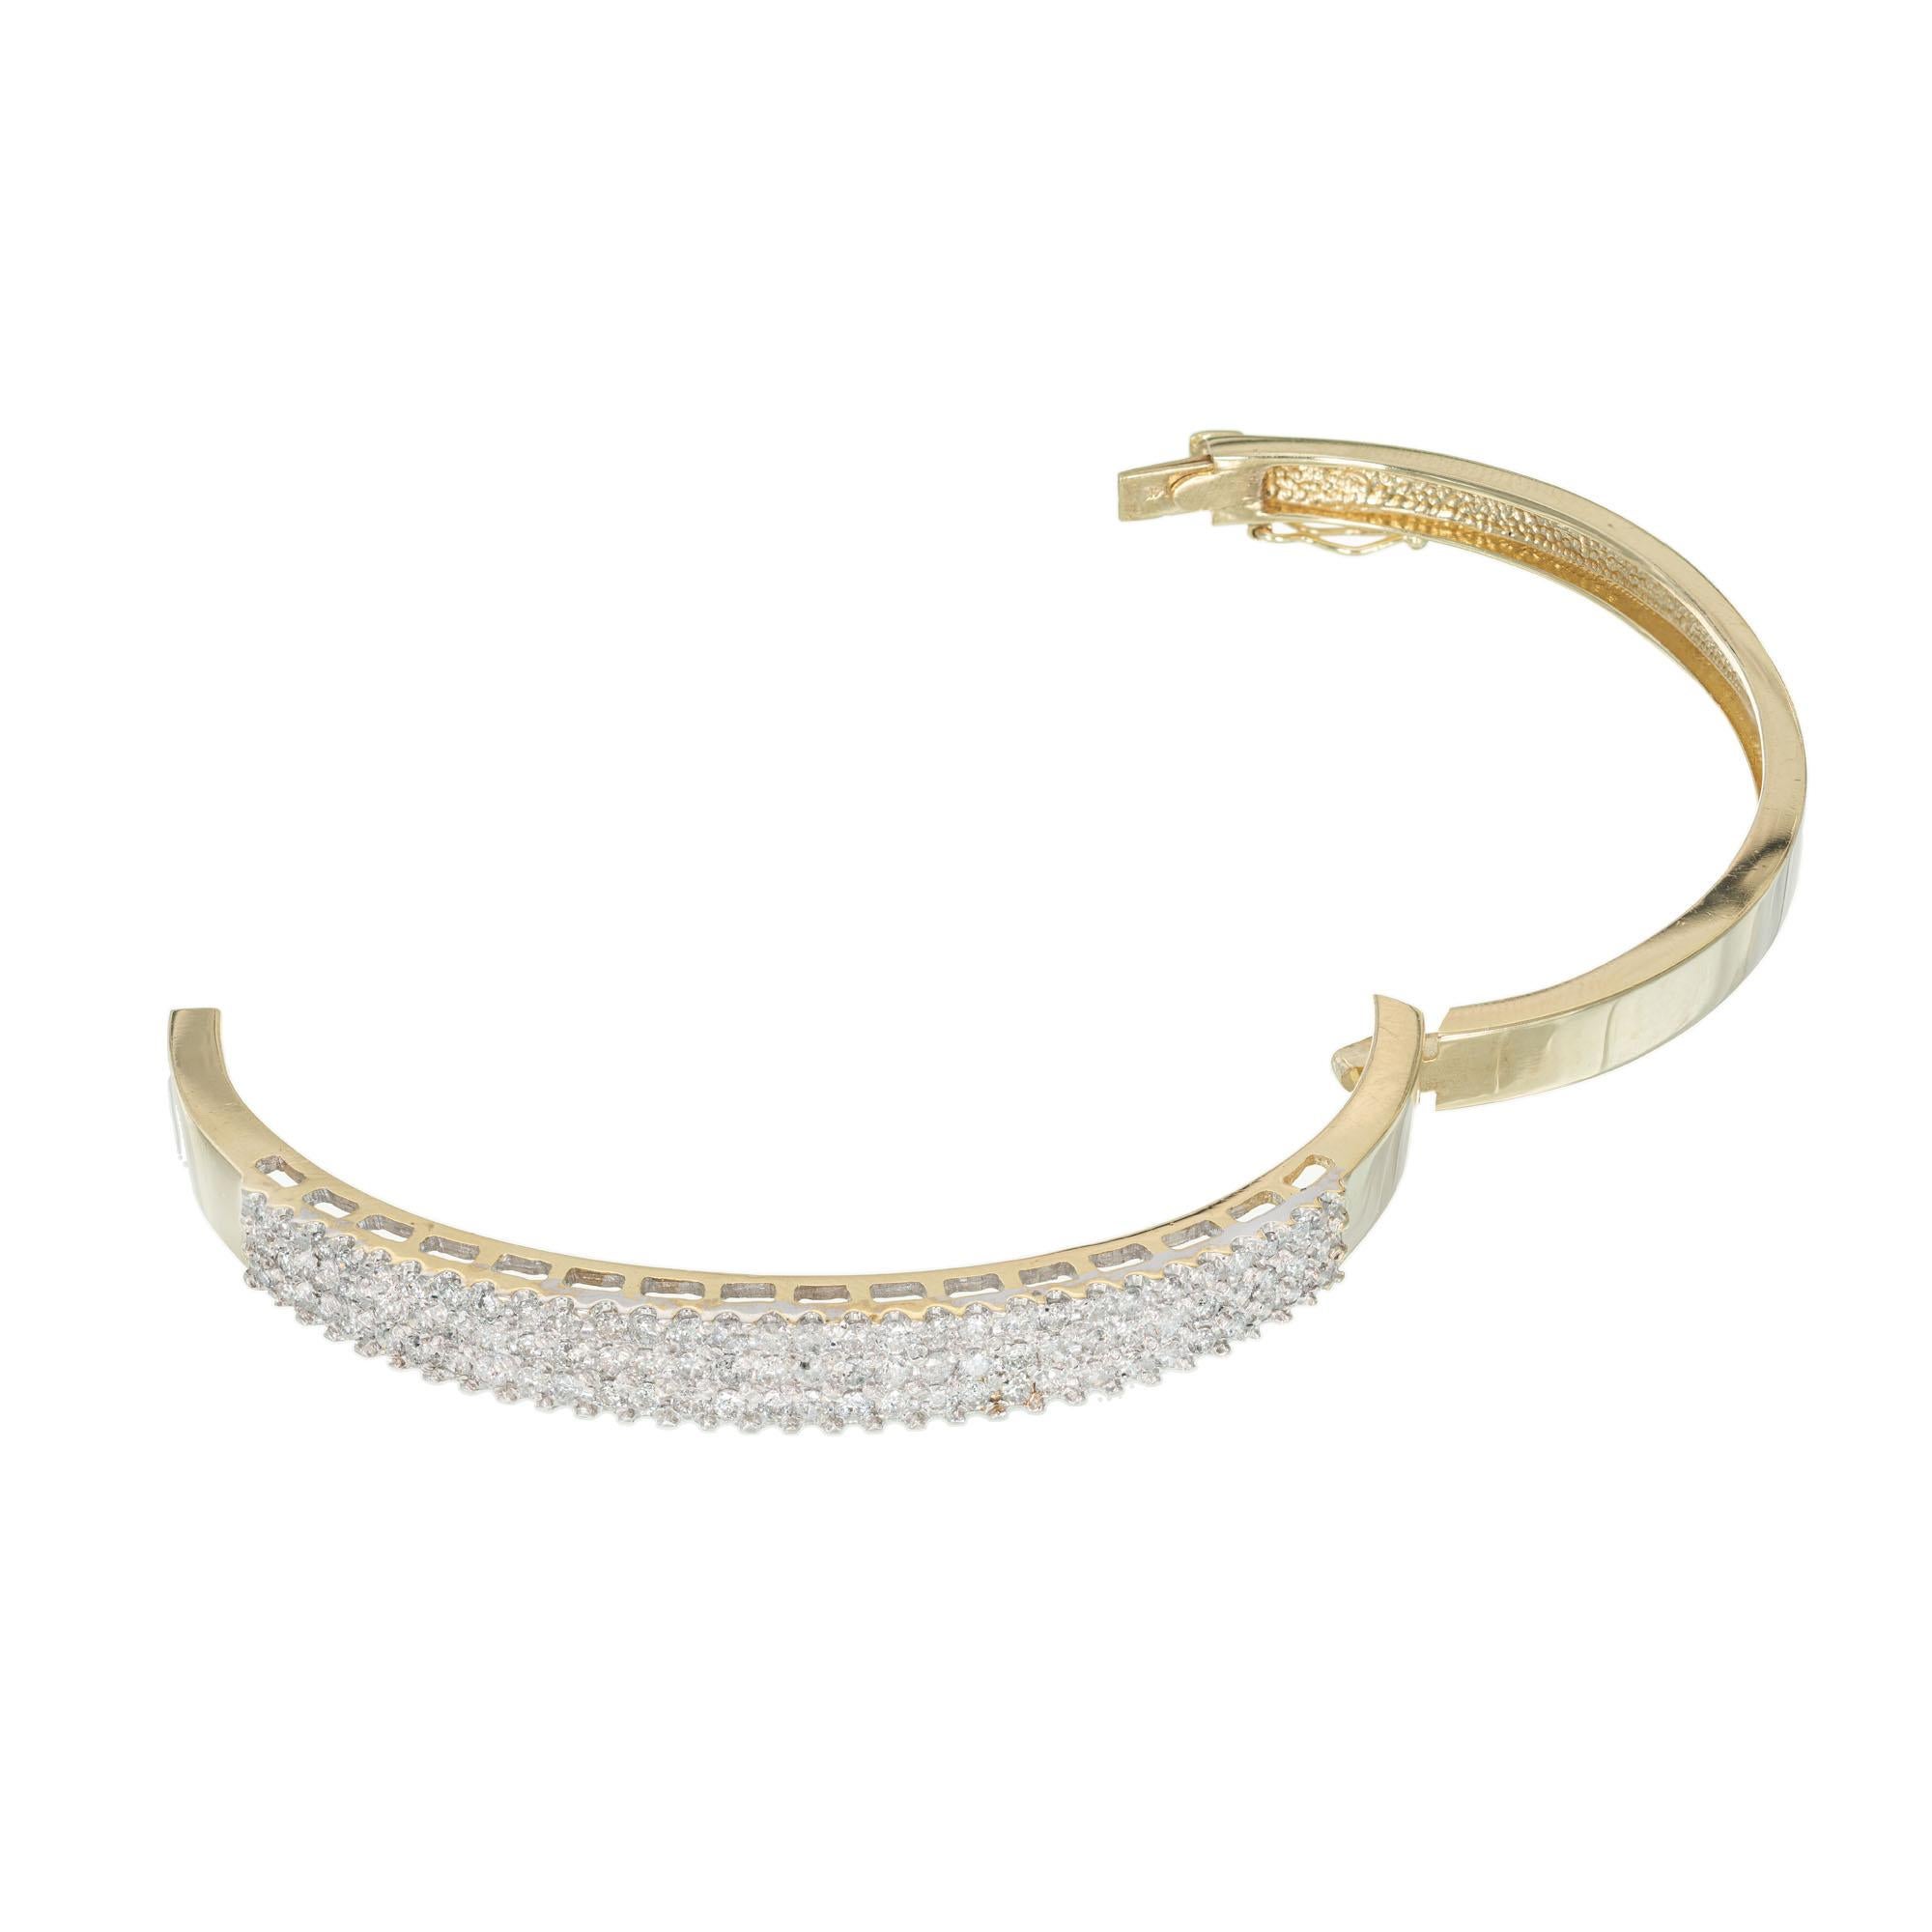 1.80 Carat Three-Row Round Diamond Gold Bangle Bracelet In Good Condition For Sale In Stamford, CT